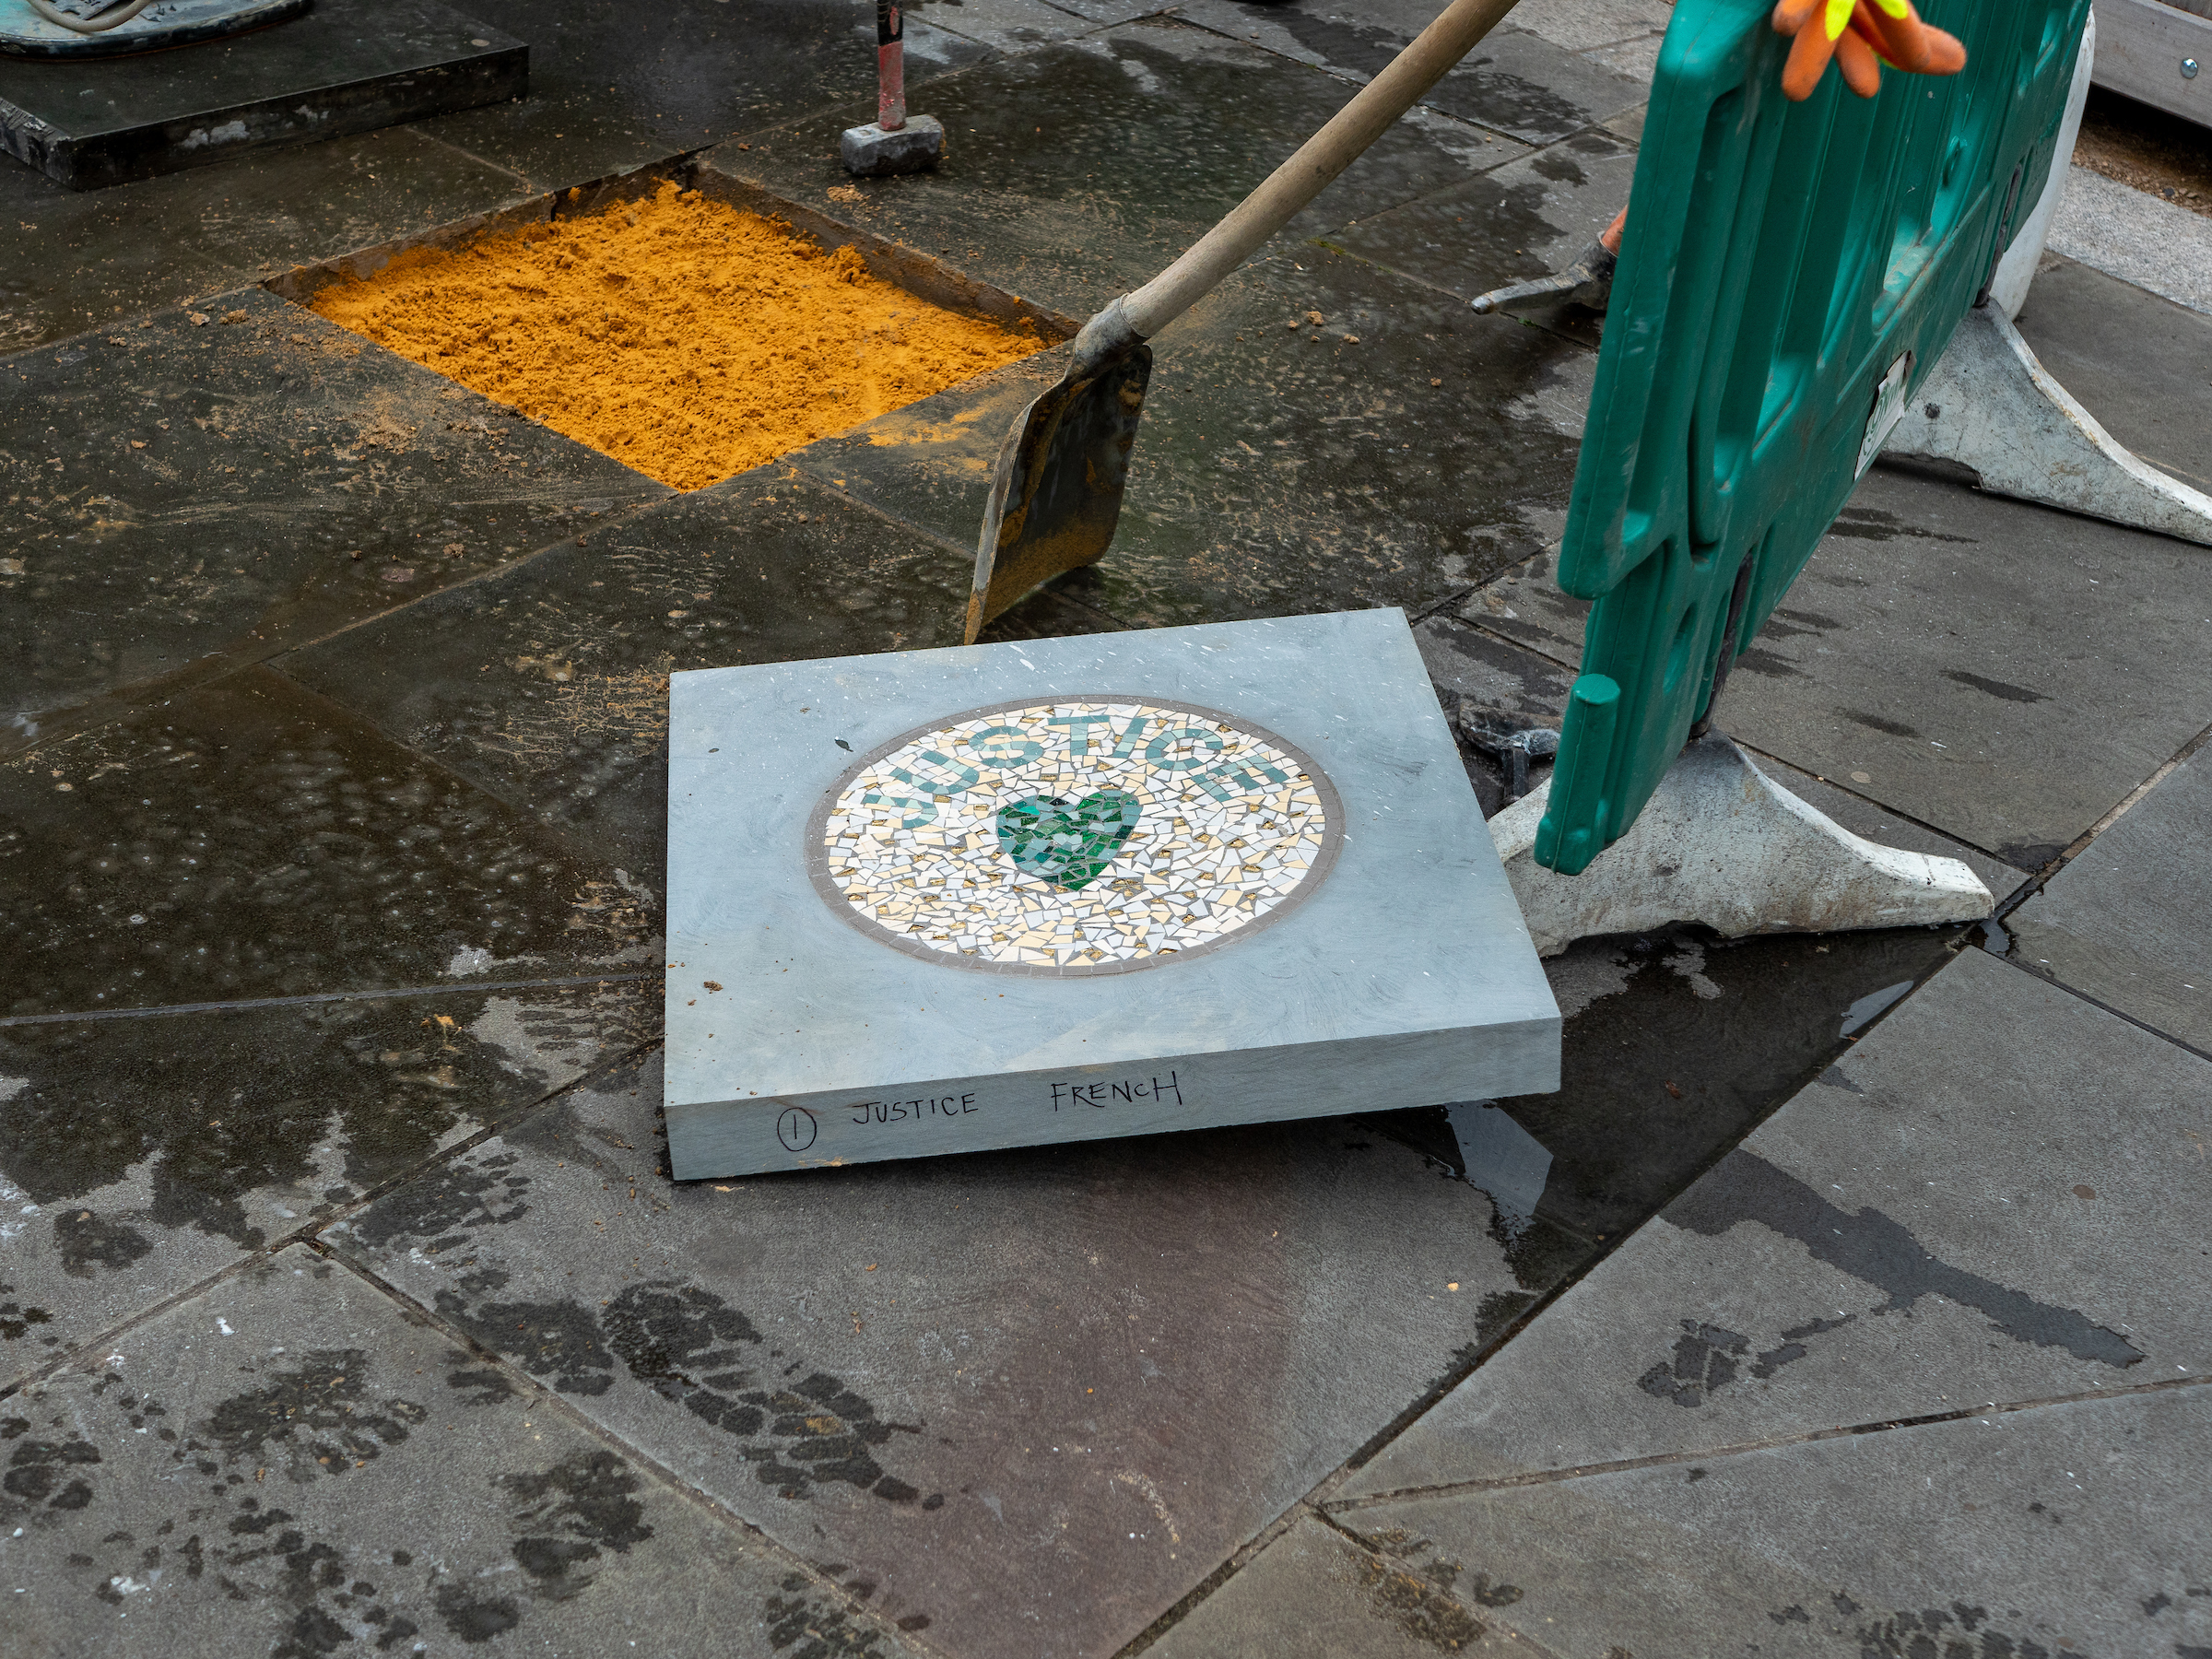 Walking as One, installation on the streets of North Kensington, London, as part of the Grenfell Memorial Community Mosaic. Photo by ACAVA Shoots (Andreia Sofia)